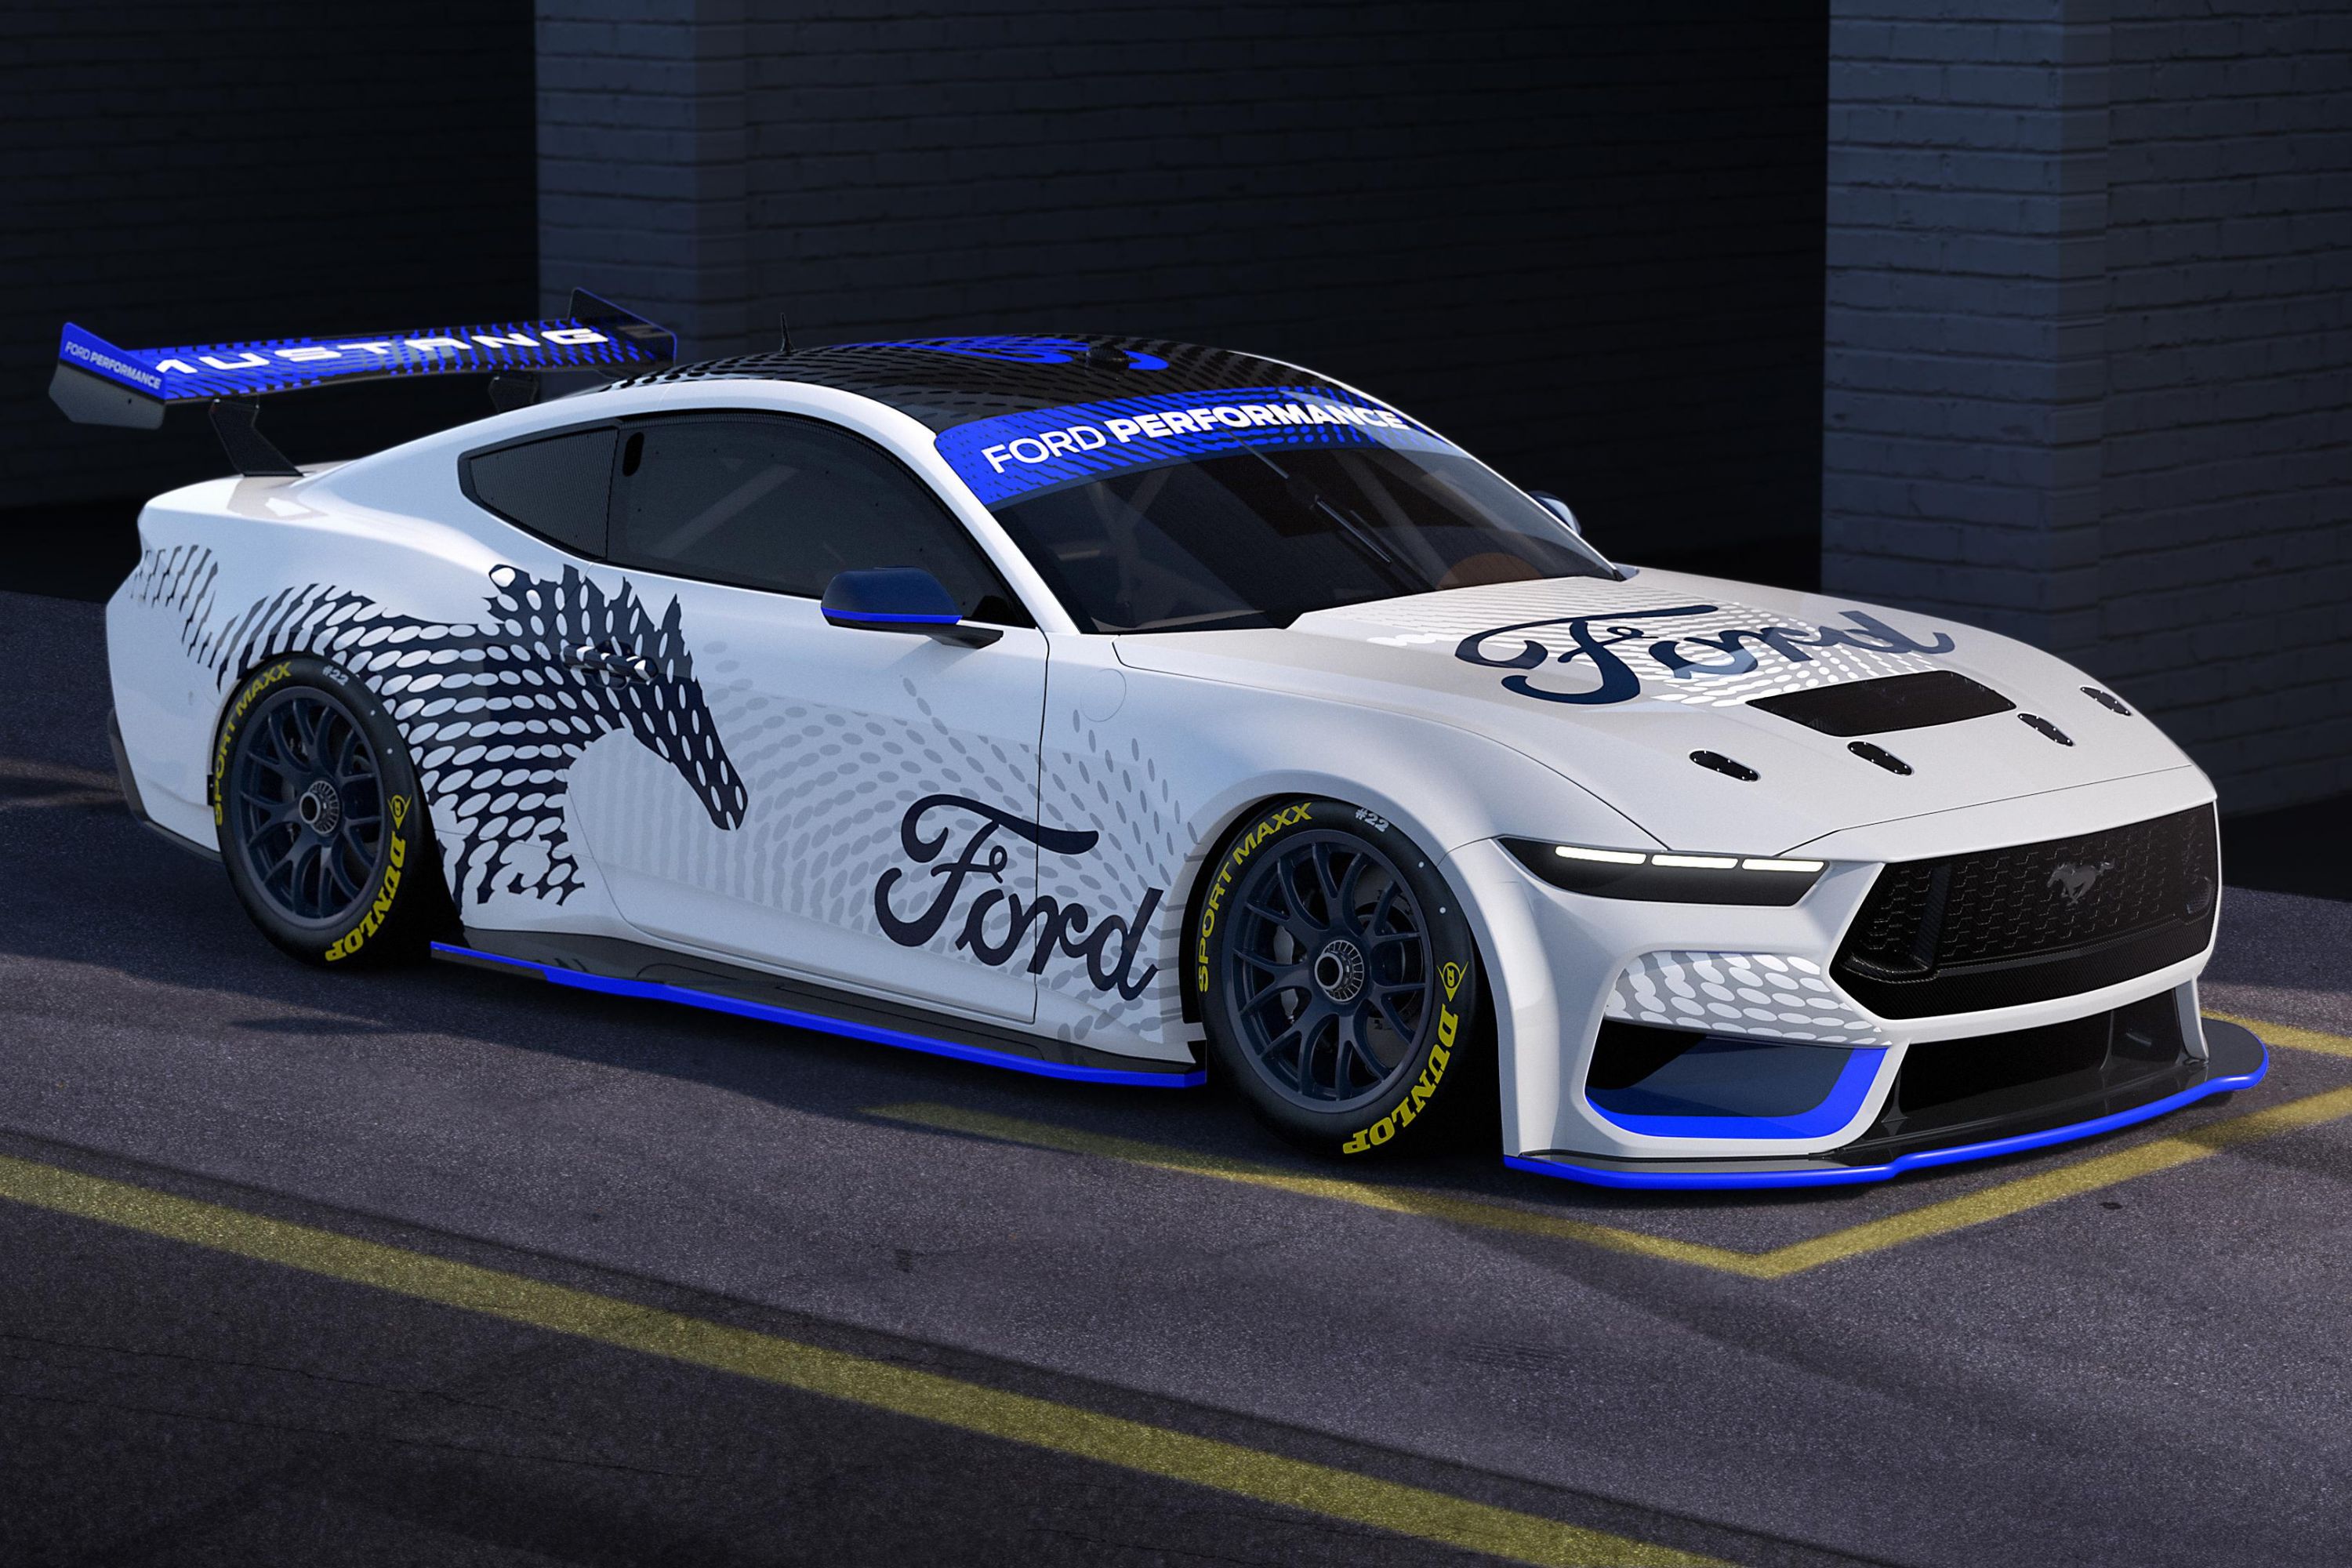 New Ford Mustang GT Supercar to be shown at Bathurst 1000 CarExpert